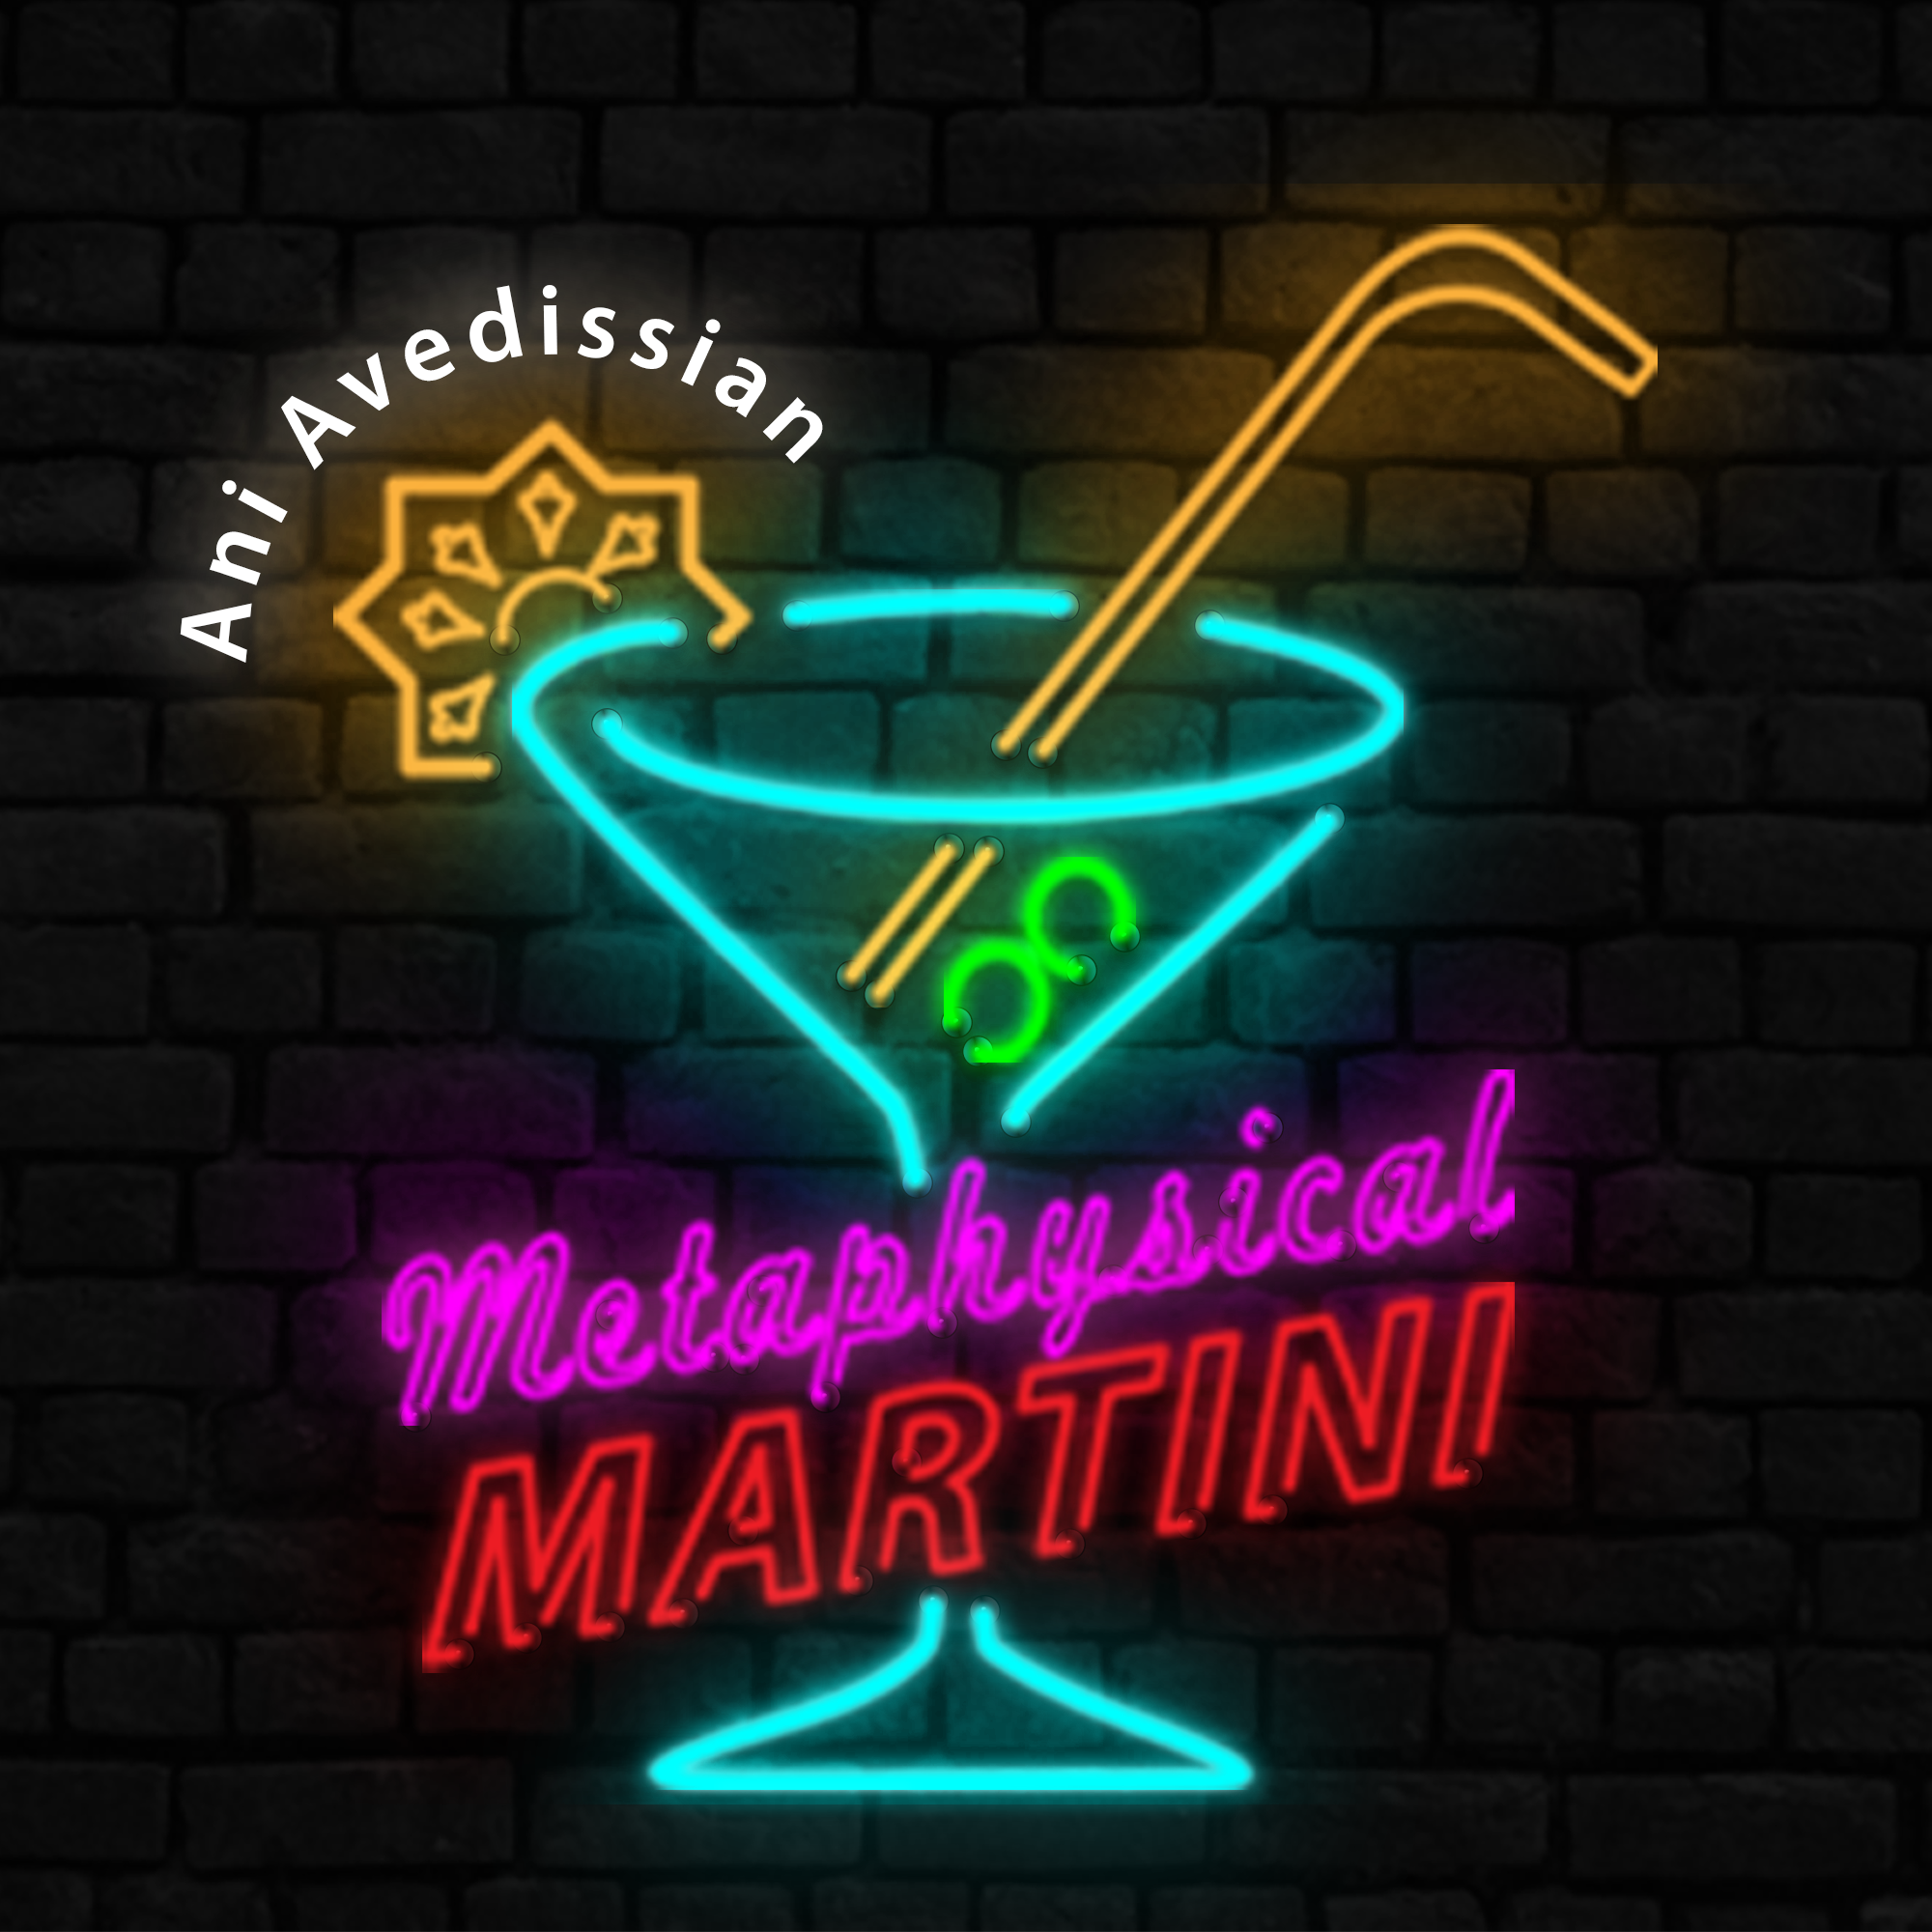 "Metaphysical Martini"   02/16/2022  - Surprises within the Fishbowl of Perpetual Perplexity!